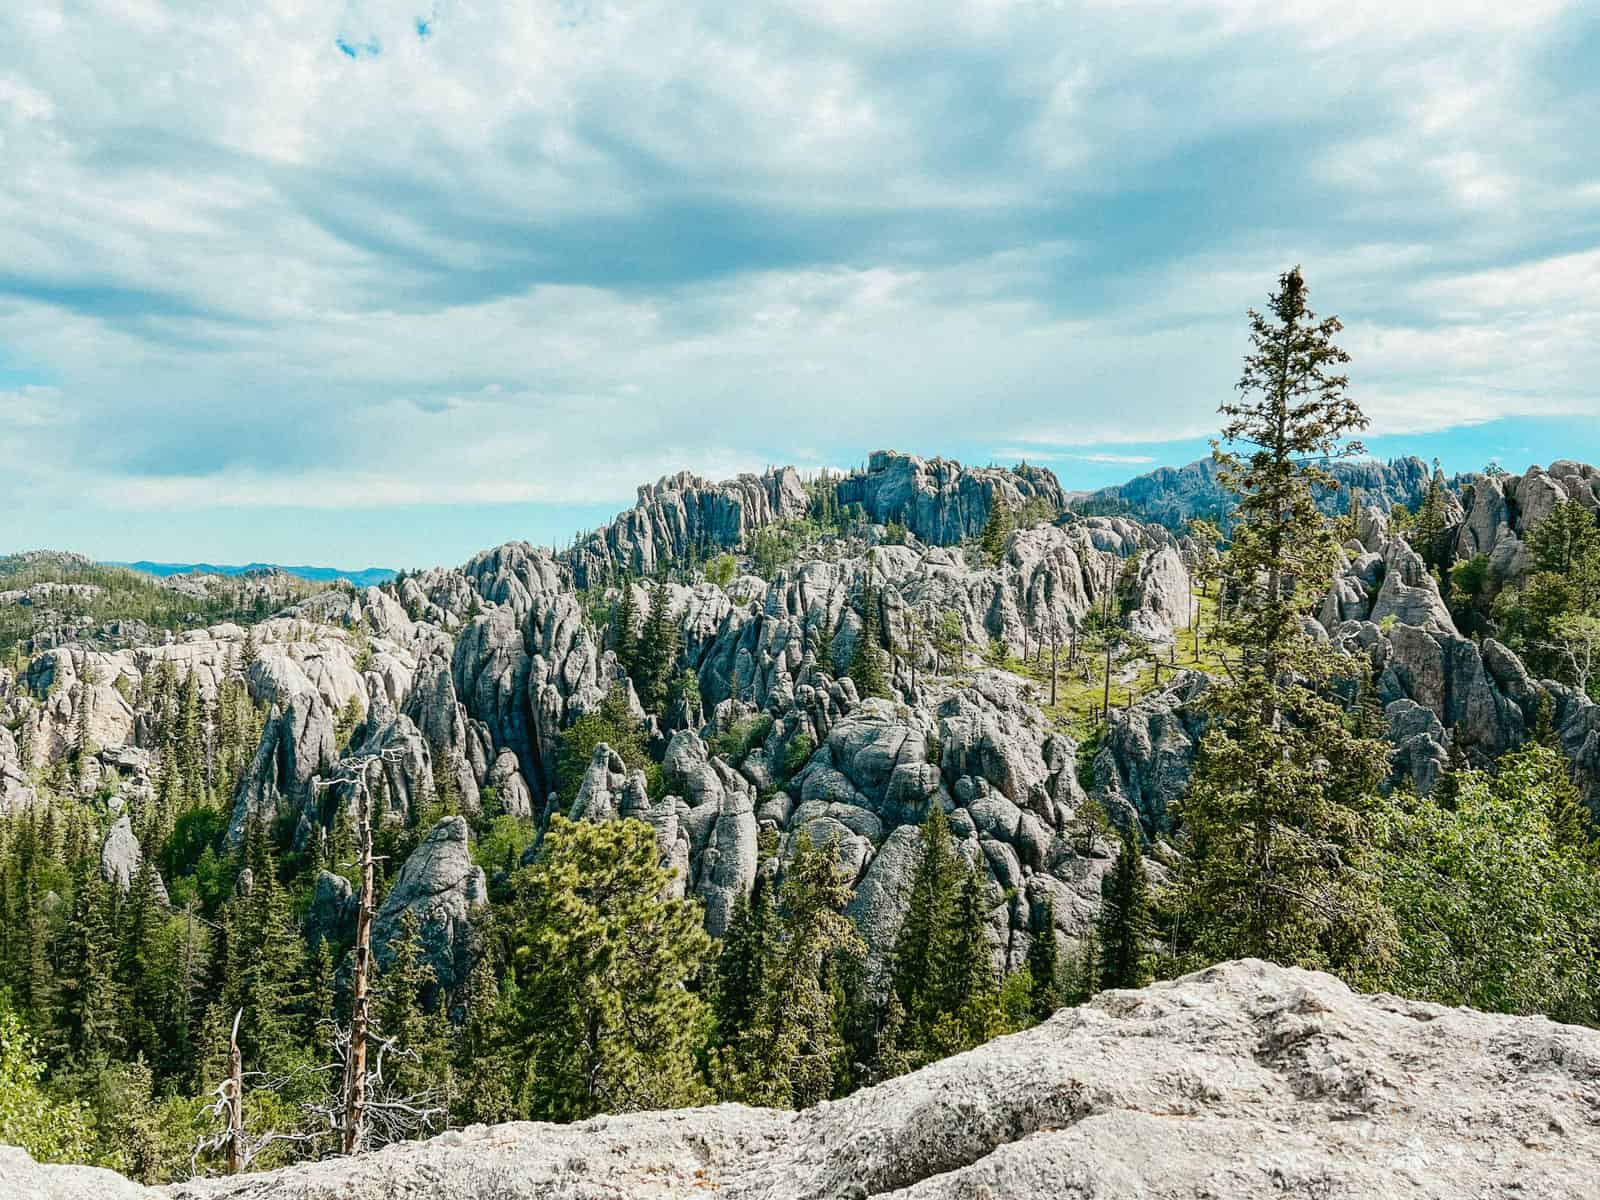 Rock formations and greenery on a hike in South Dakota.